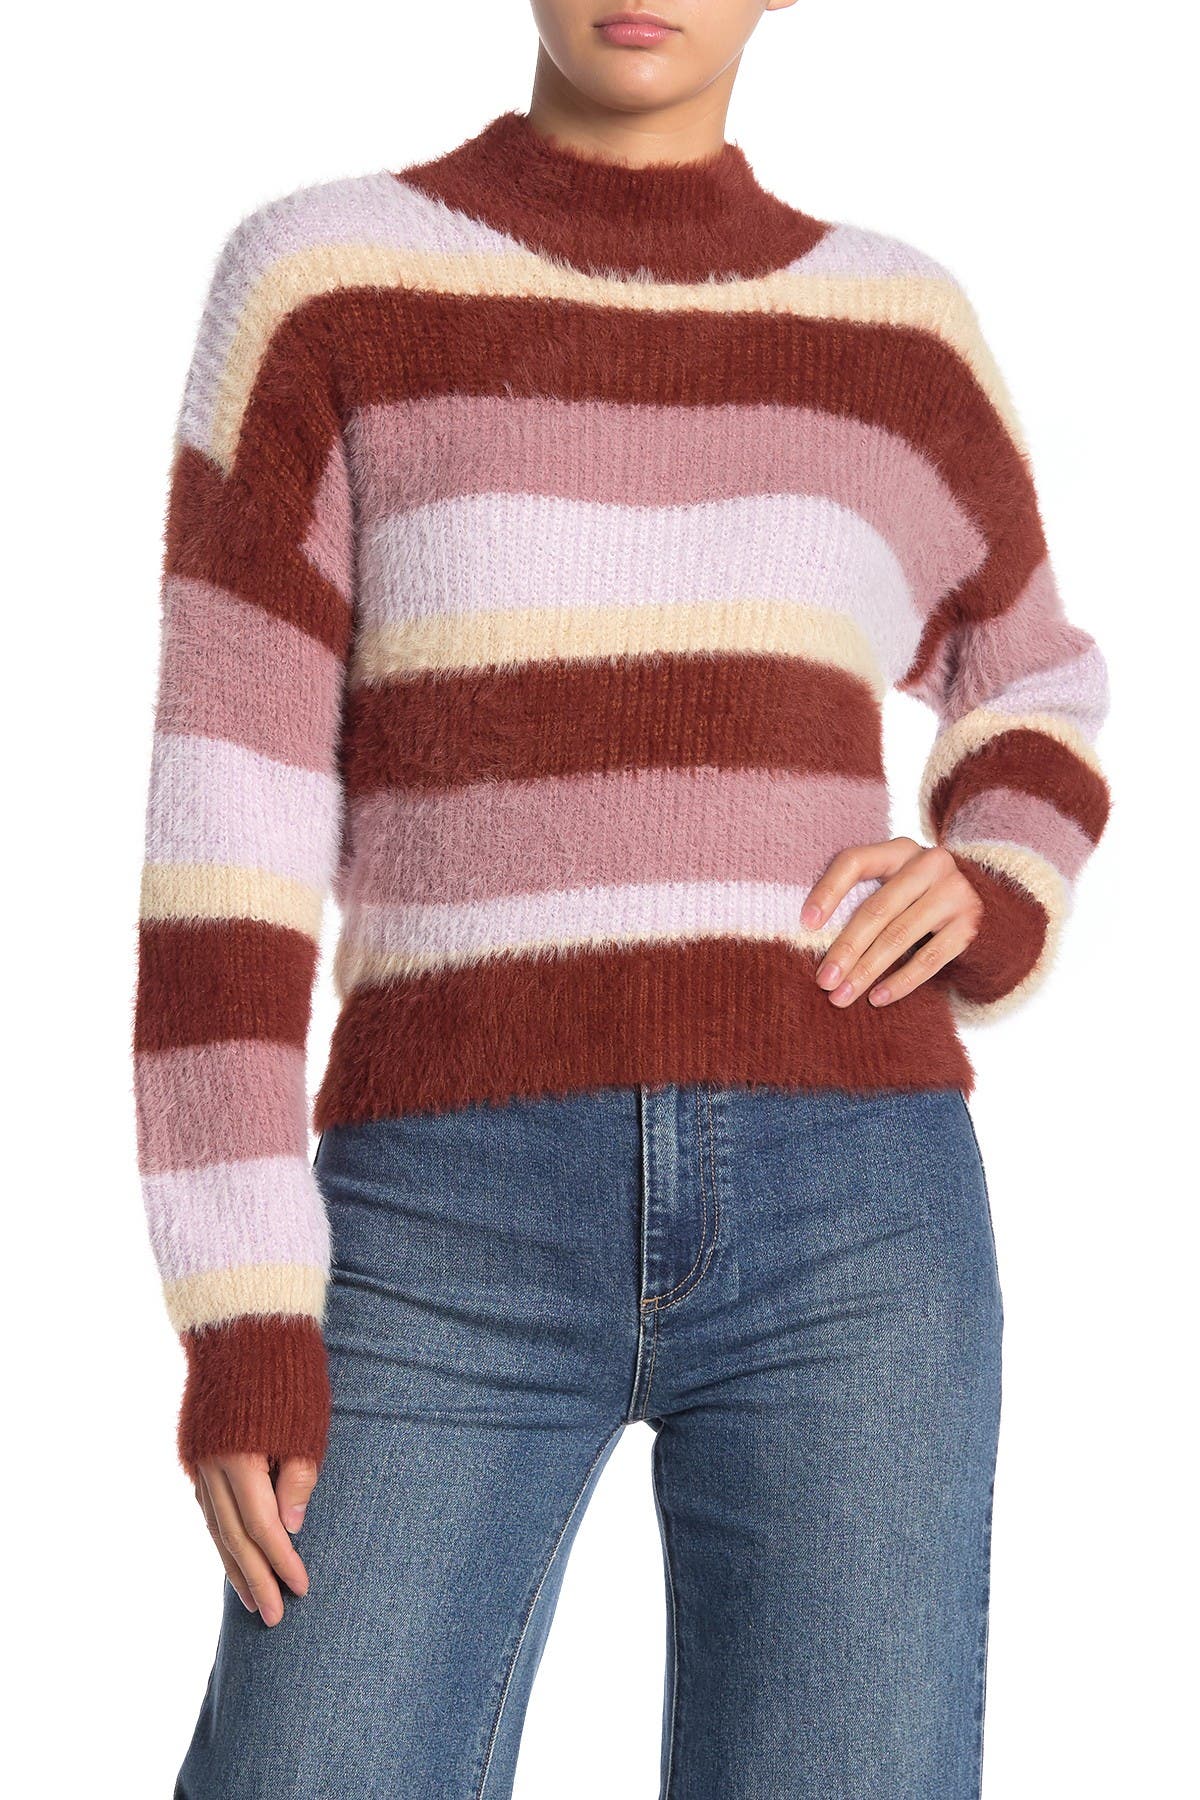 Lush Cozy Striped Knit Sweater Nordstrom Rack